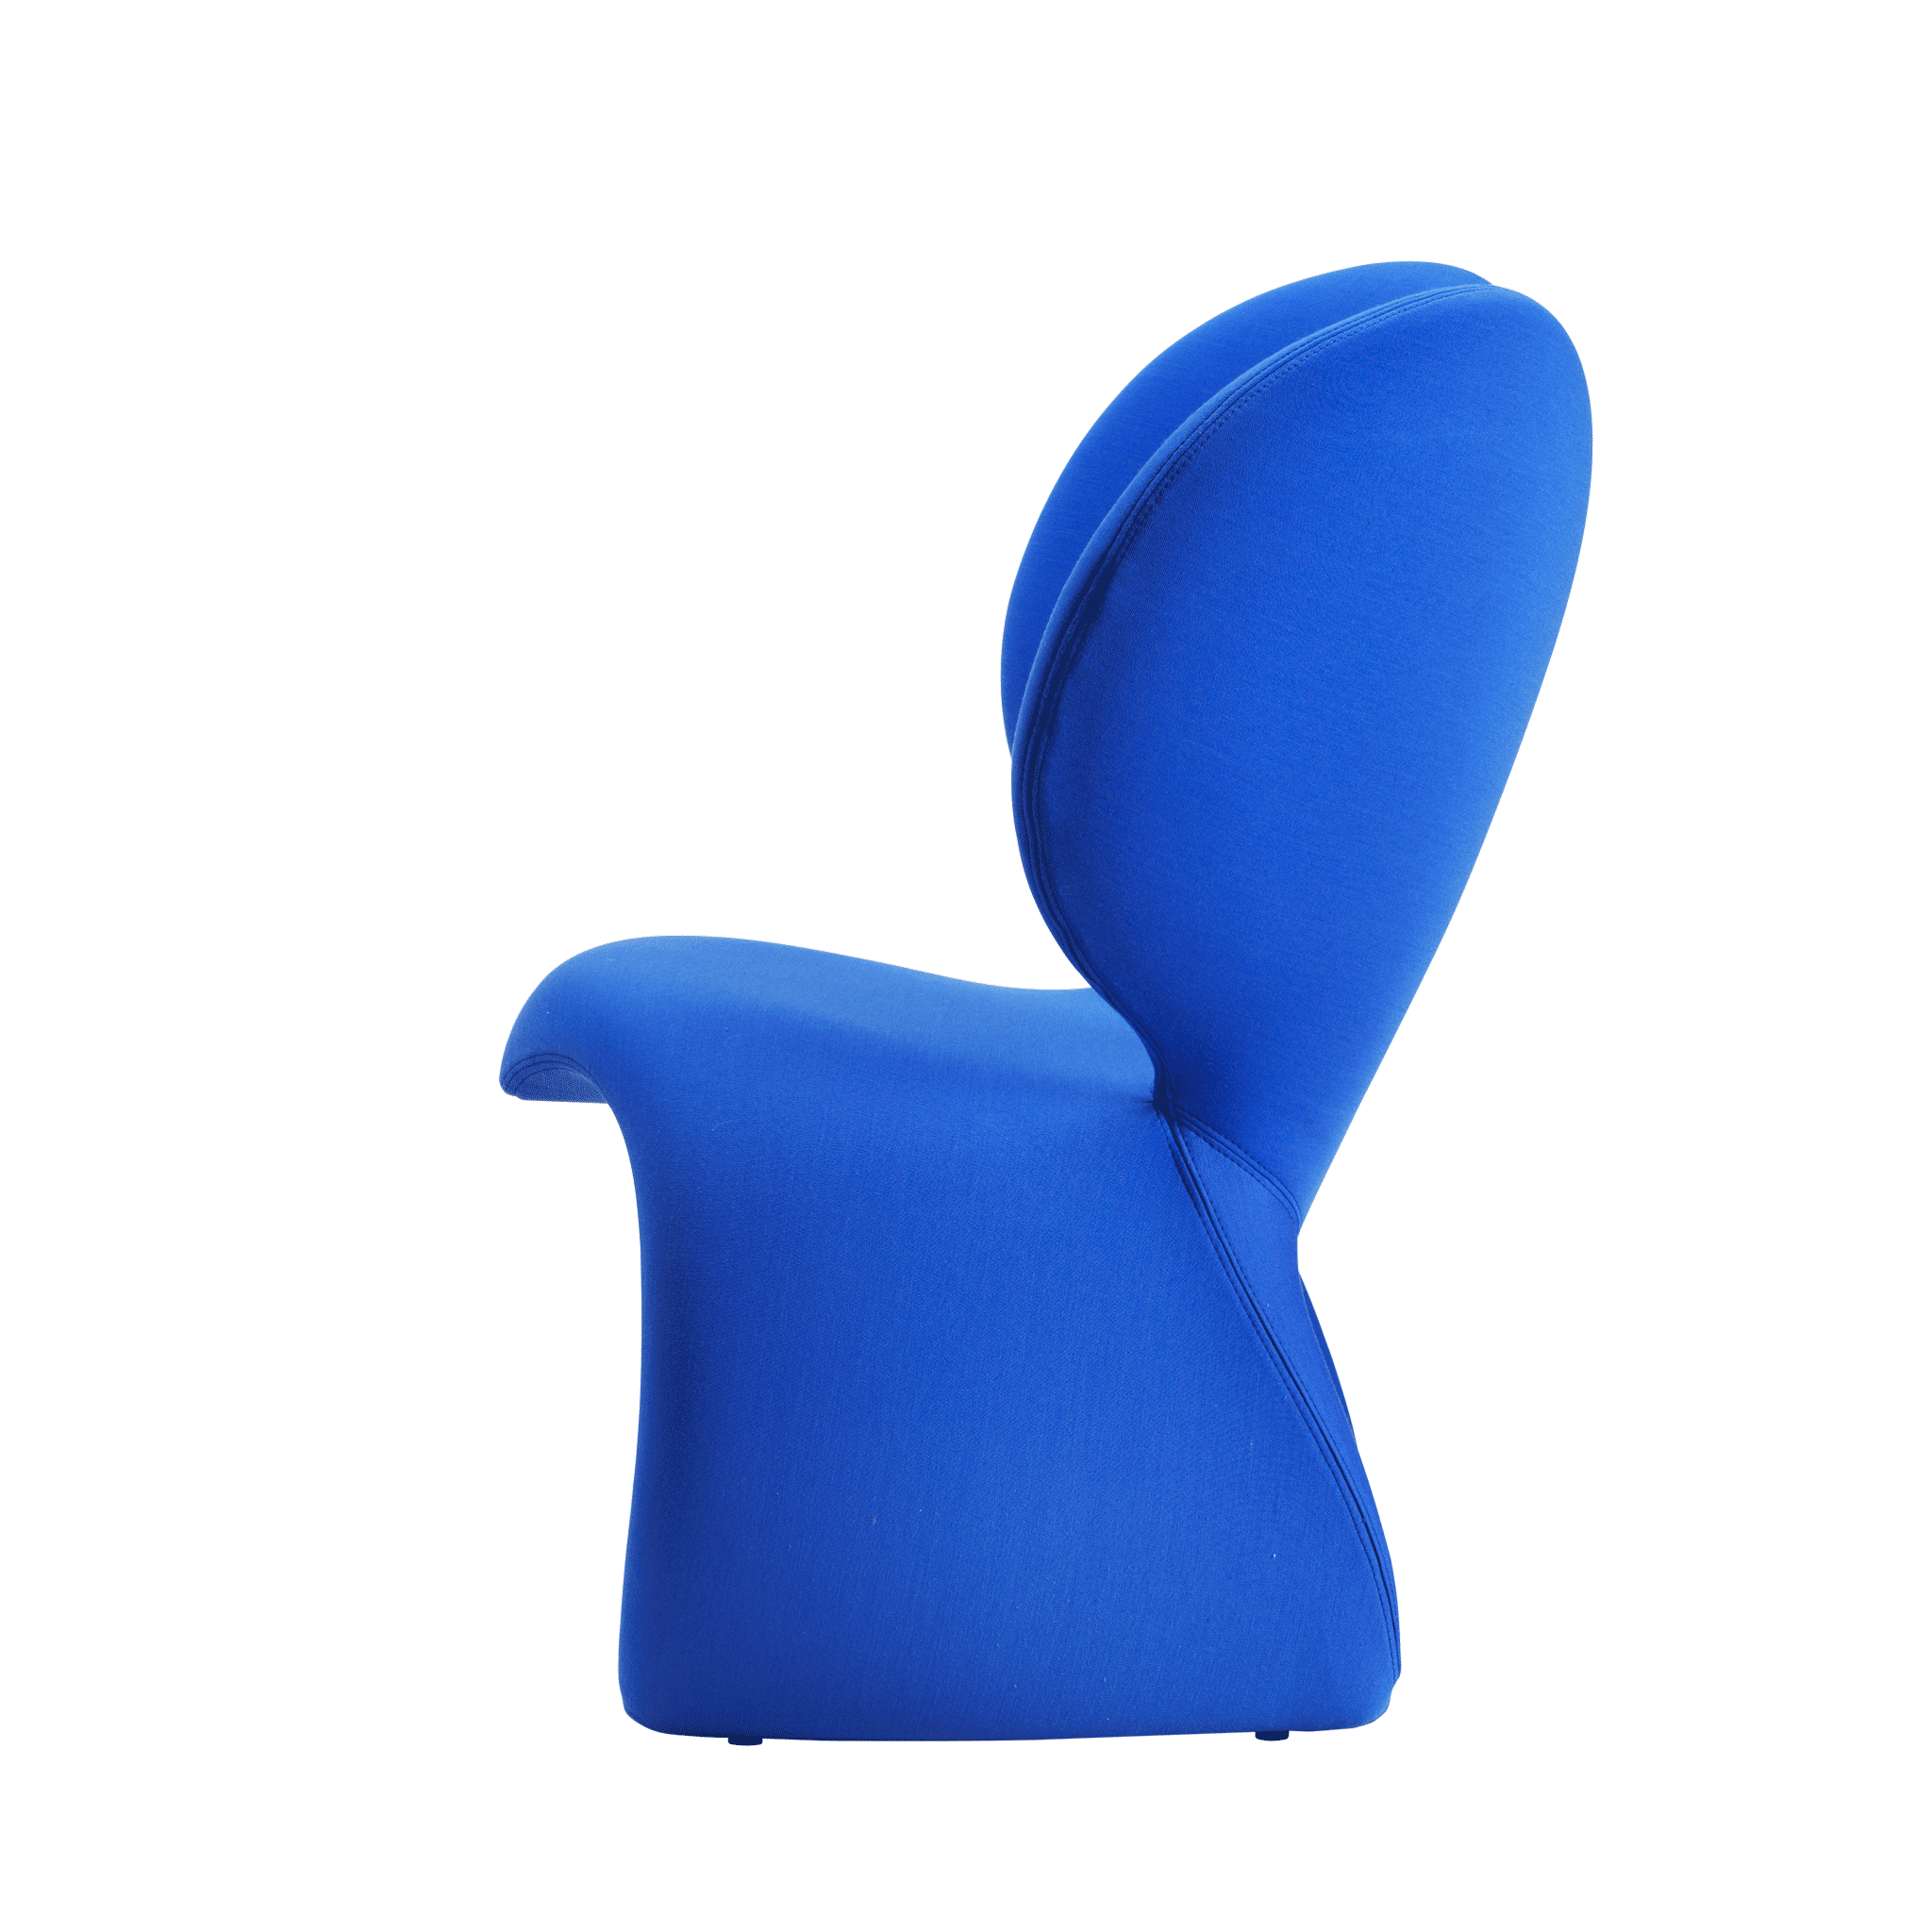 Qeeboo Don’t F**k with the Mouse Armchair Fabric